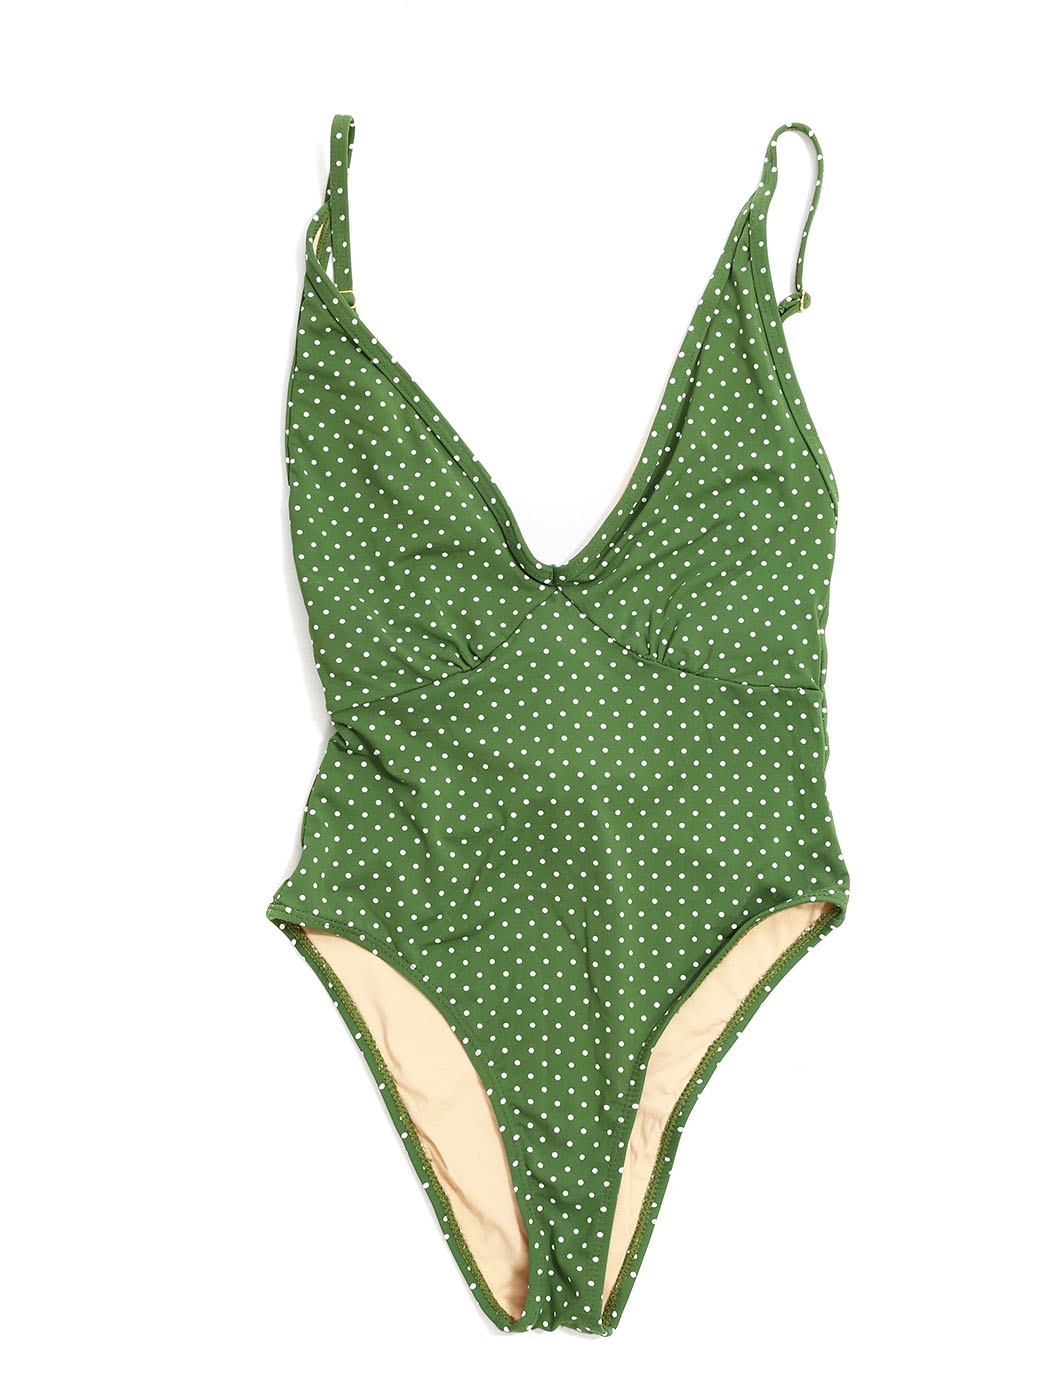 Boutique PEONY St Jean one piece green and white polka dot printed swimsuit  Retail price $170 Size XS